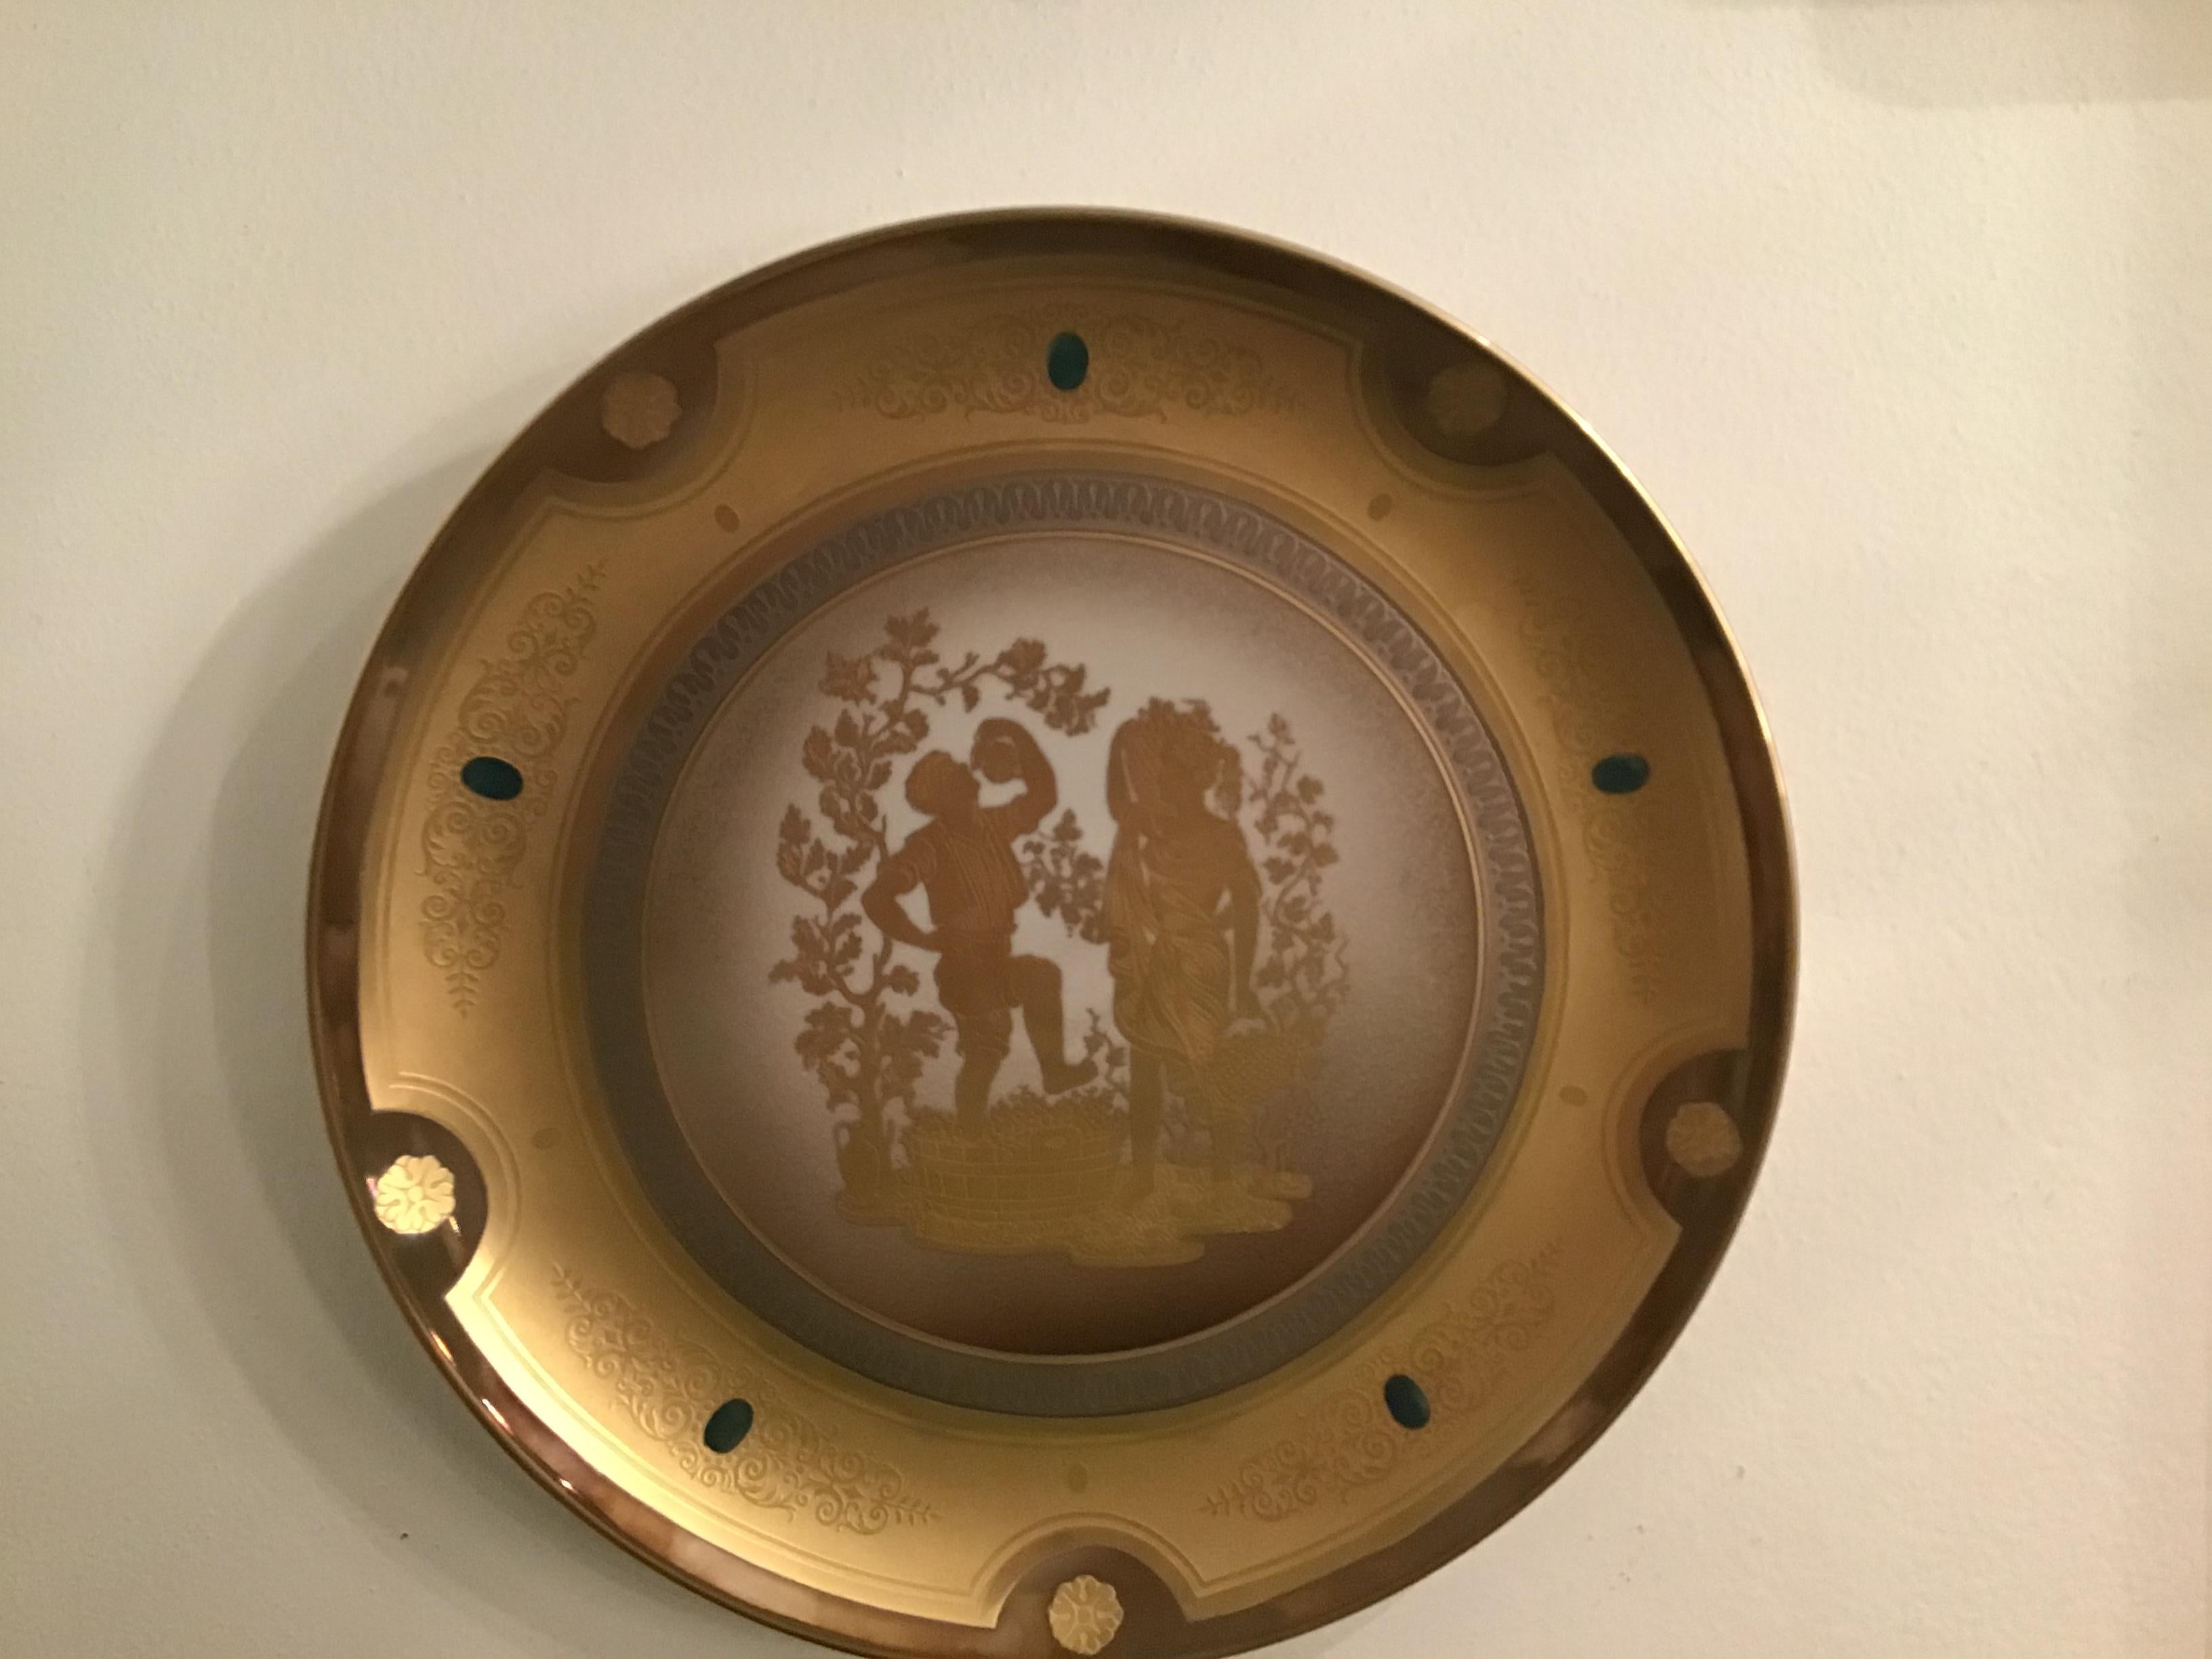 Morbelli Porcelain Wall Plate Gold “ Autunno”, 1960, Italy For Sale 4